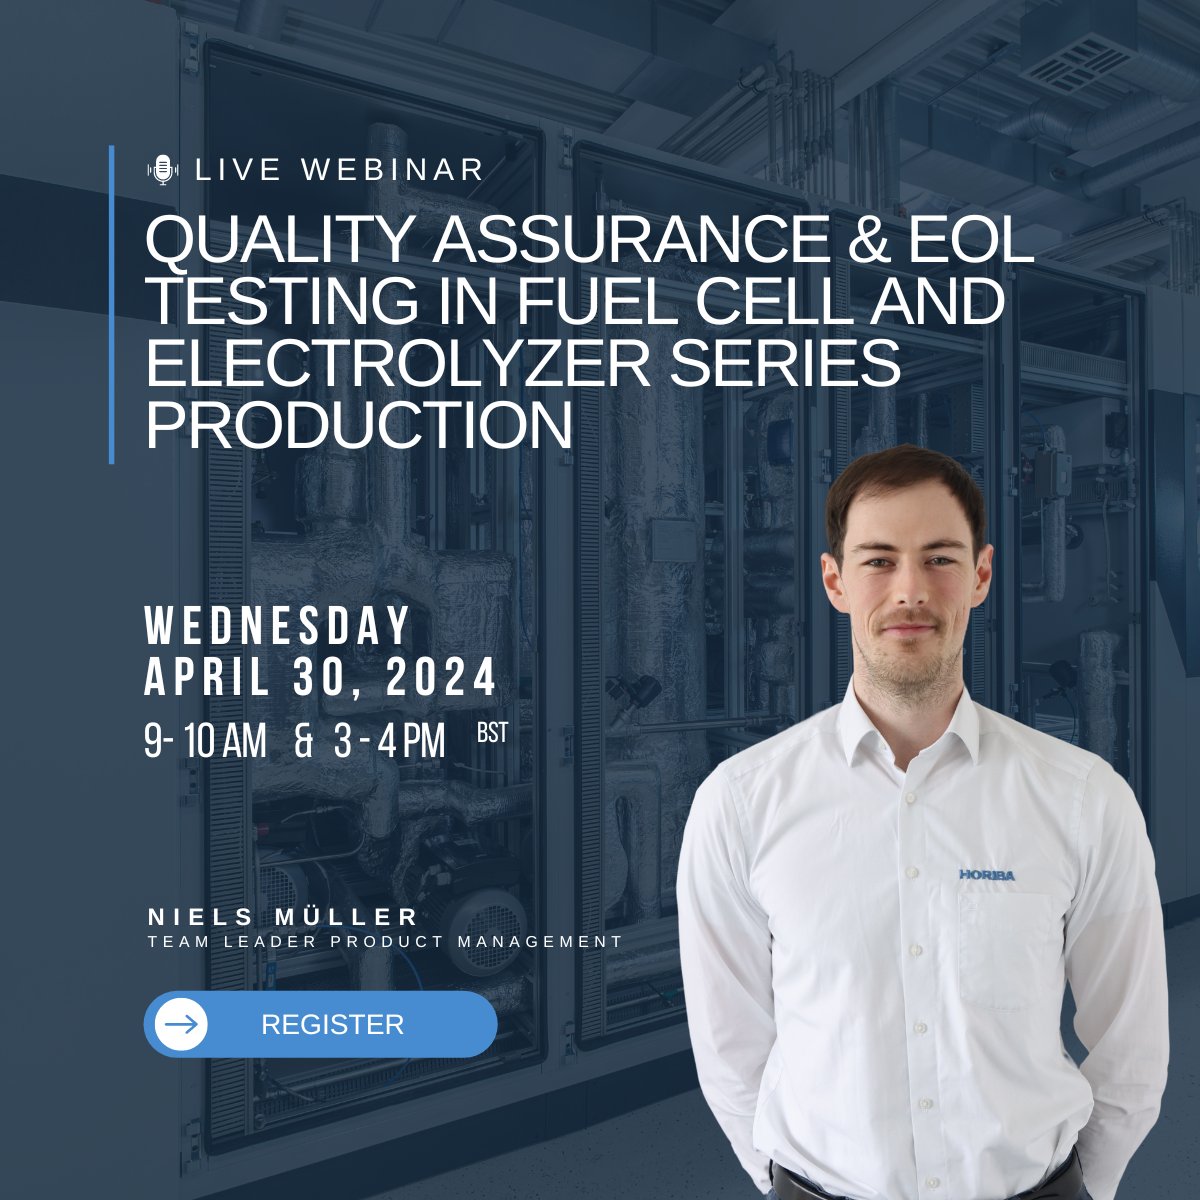 1 week until our webinar on the challenges of #electrolyser usage and #HORIBA's solutions for accurate #rawmaterialanalysis, online measurements, post-mortem analysis of electrolysers and testing next-generation electrolysers. Register: horiba.link/r15 #greenhydrogen